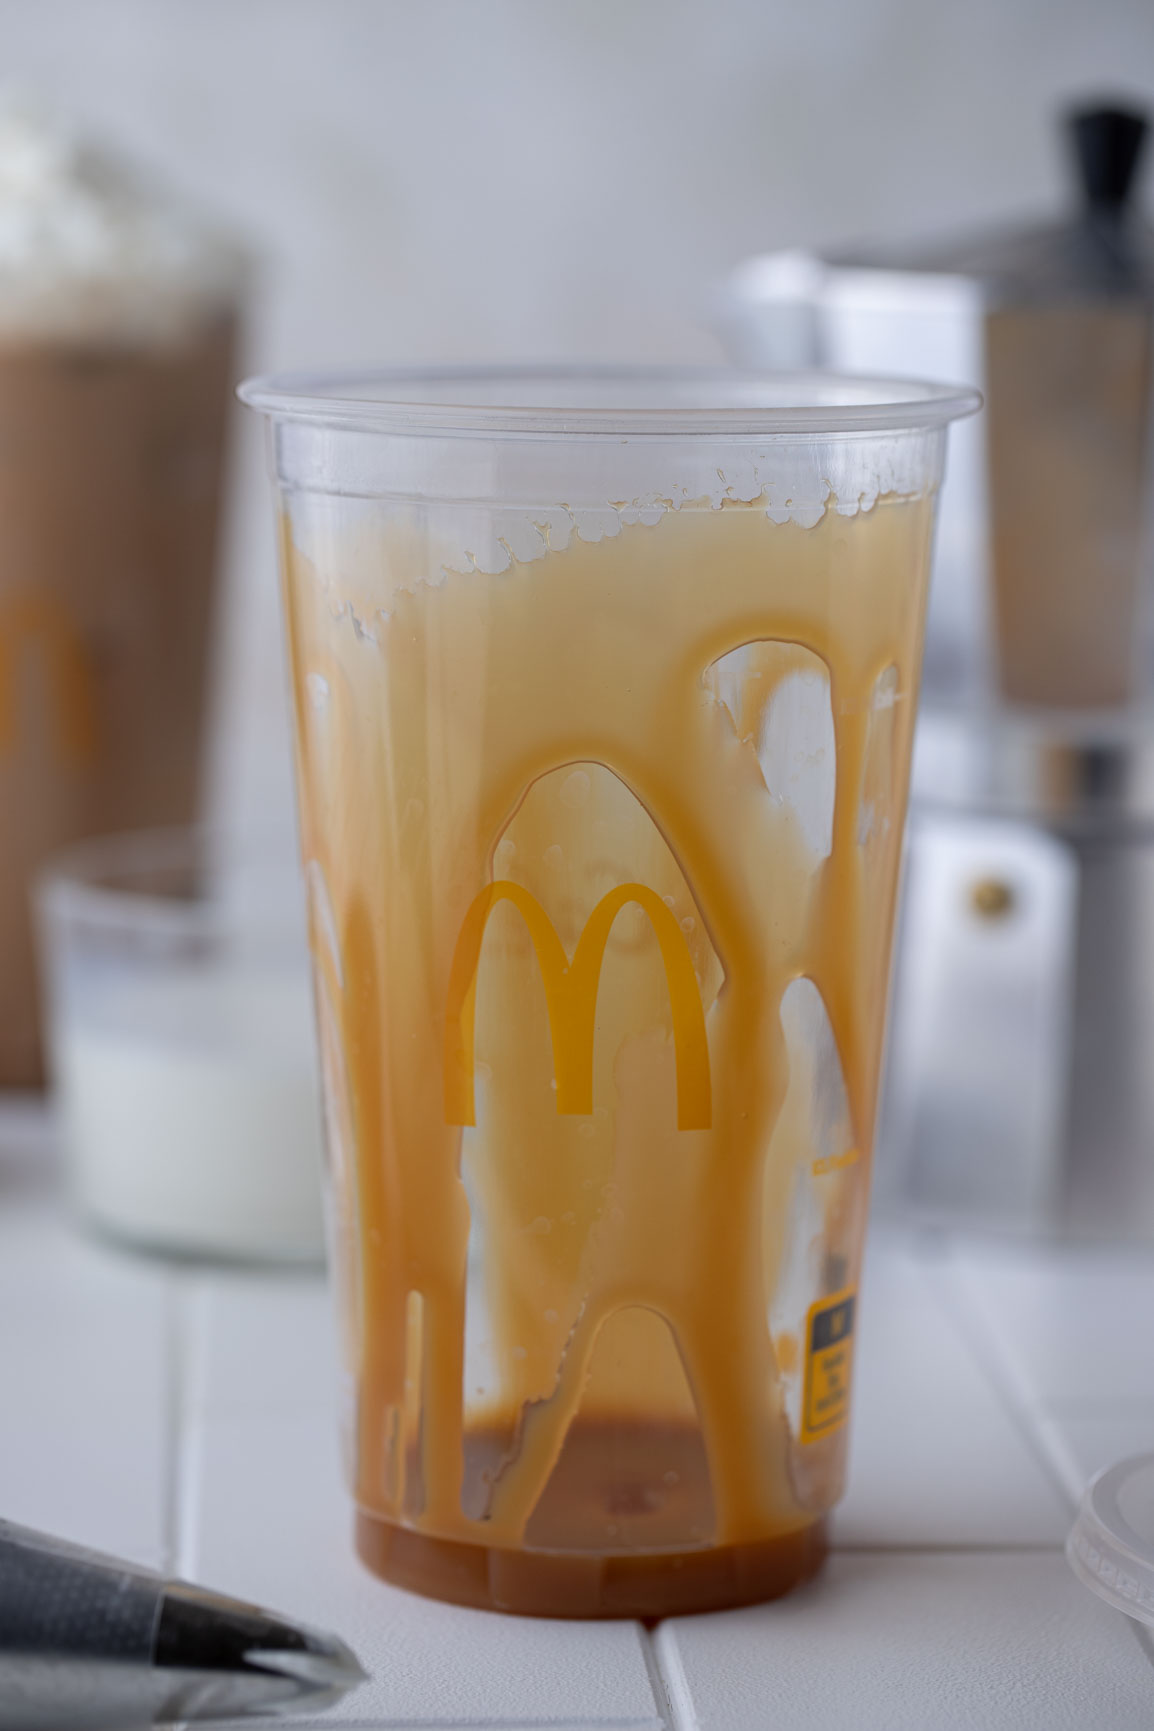 caramel sauce on the inside of the cup